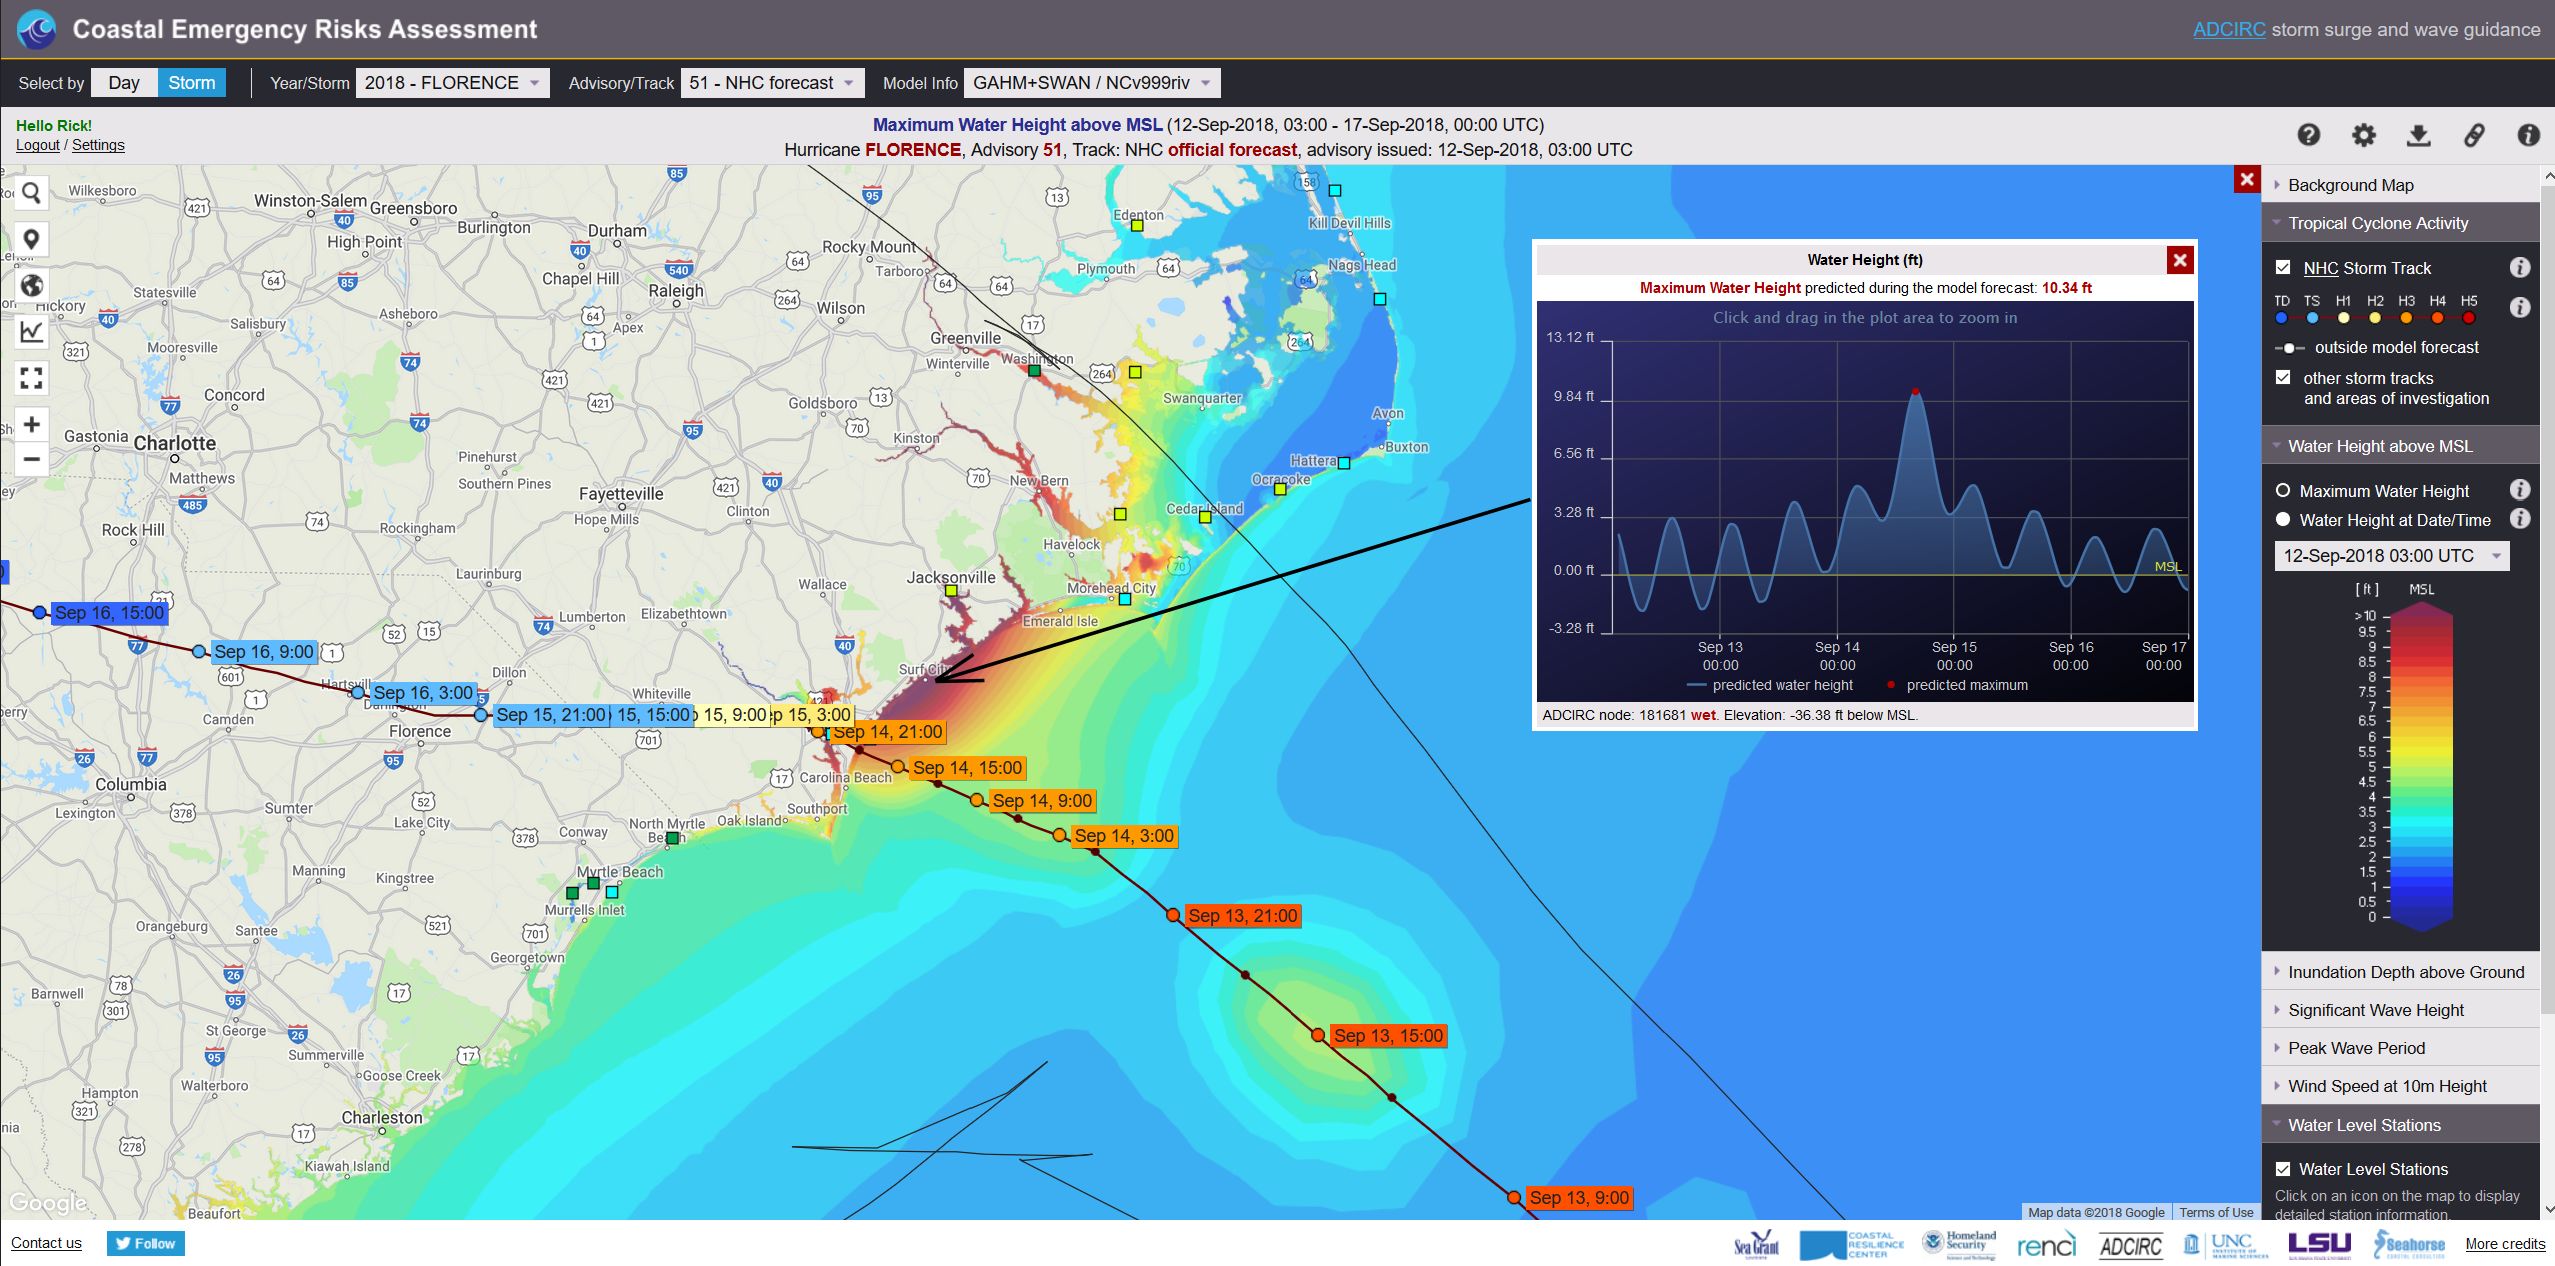 The ADCIRC model, results of which are displayed at cera.coastalrisk.live, predicts data such as maximum water heights at specific locations during a forecast period. A prediction from Hurricane Florence (2018) is seen above.